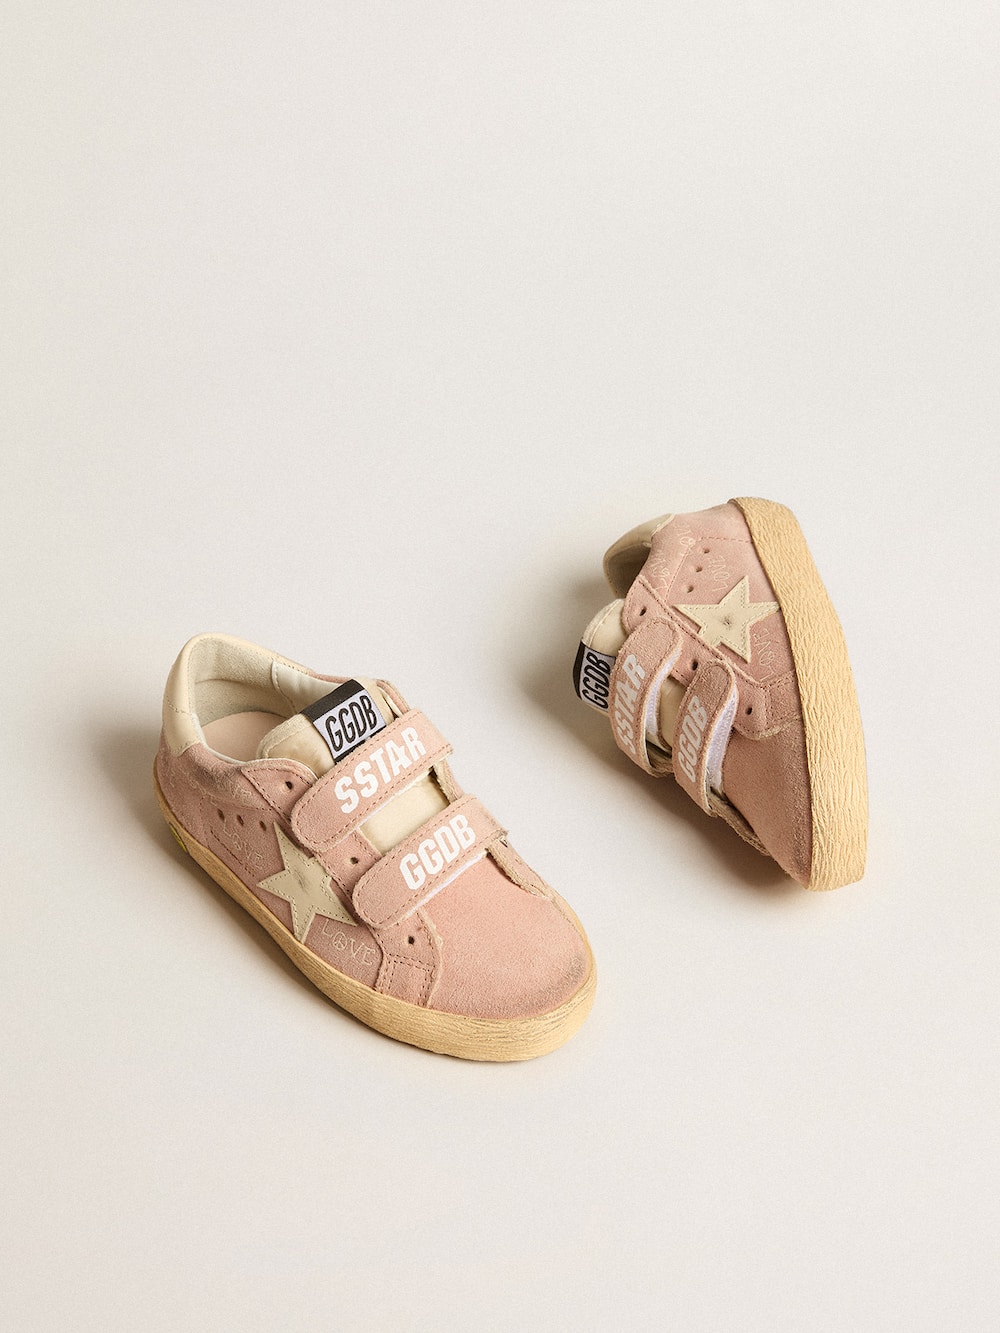 Golden Goose - Old School Junior in pink suede with cream leather star and heel tab in 